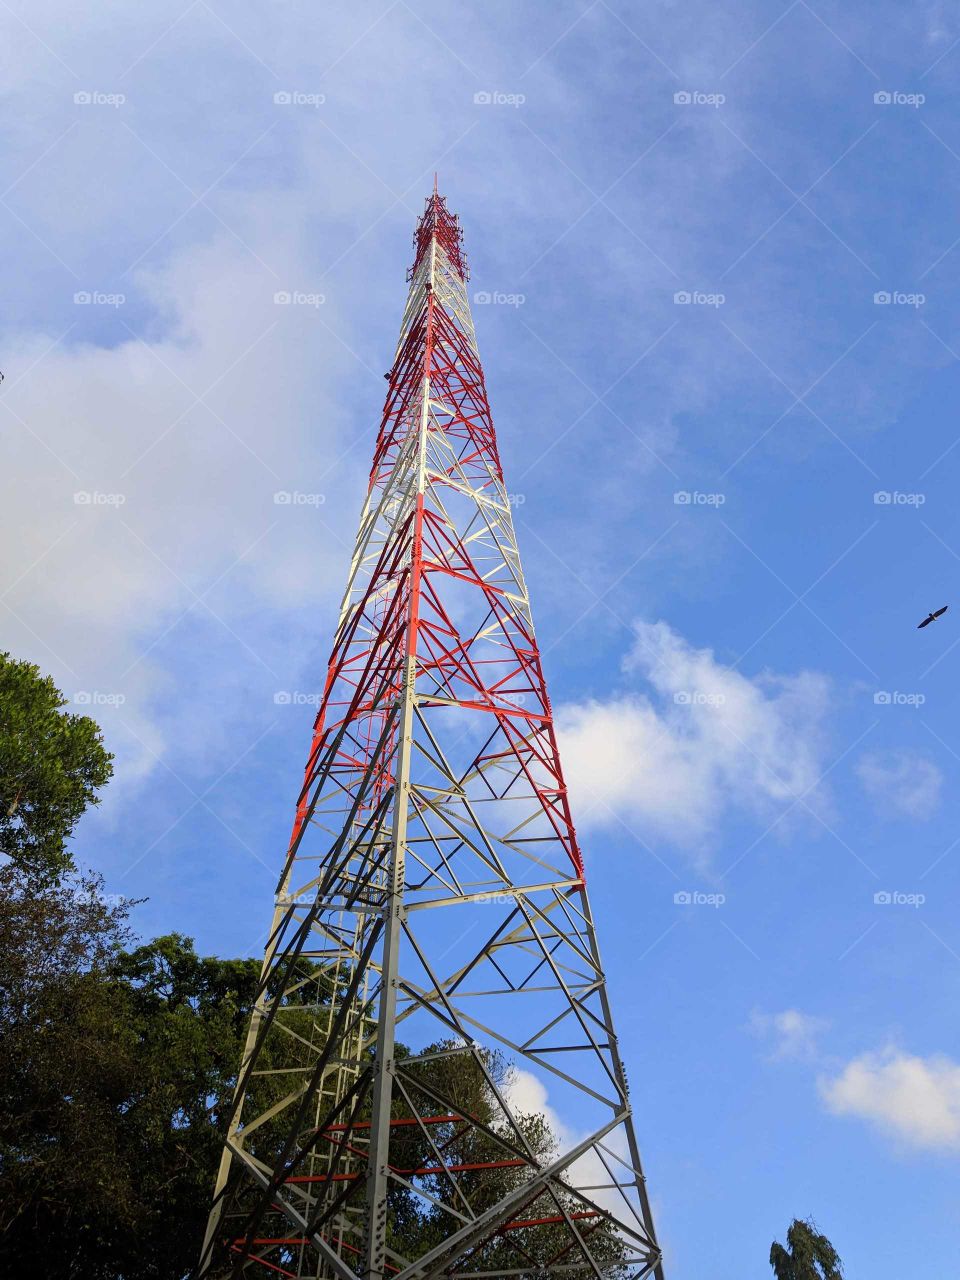 a full cell tower with the beautiful sky behind it and the green trees amid the blue sky also fading in the distance.